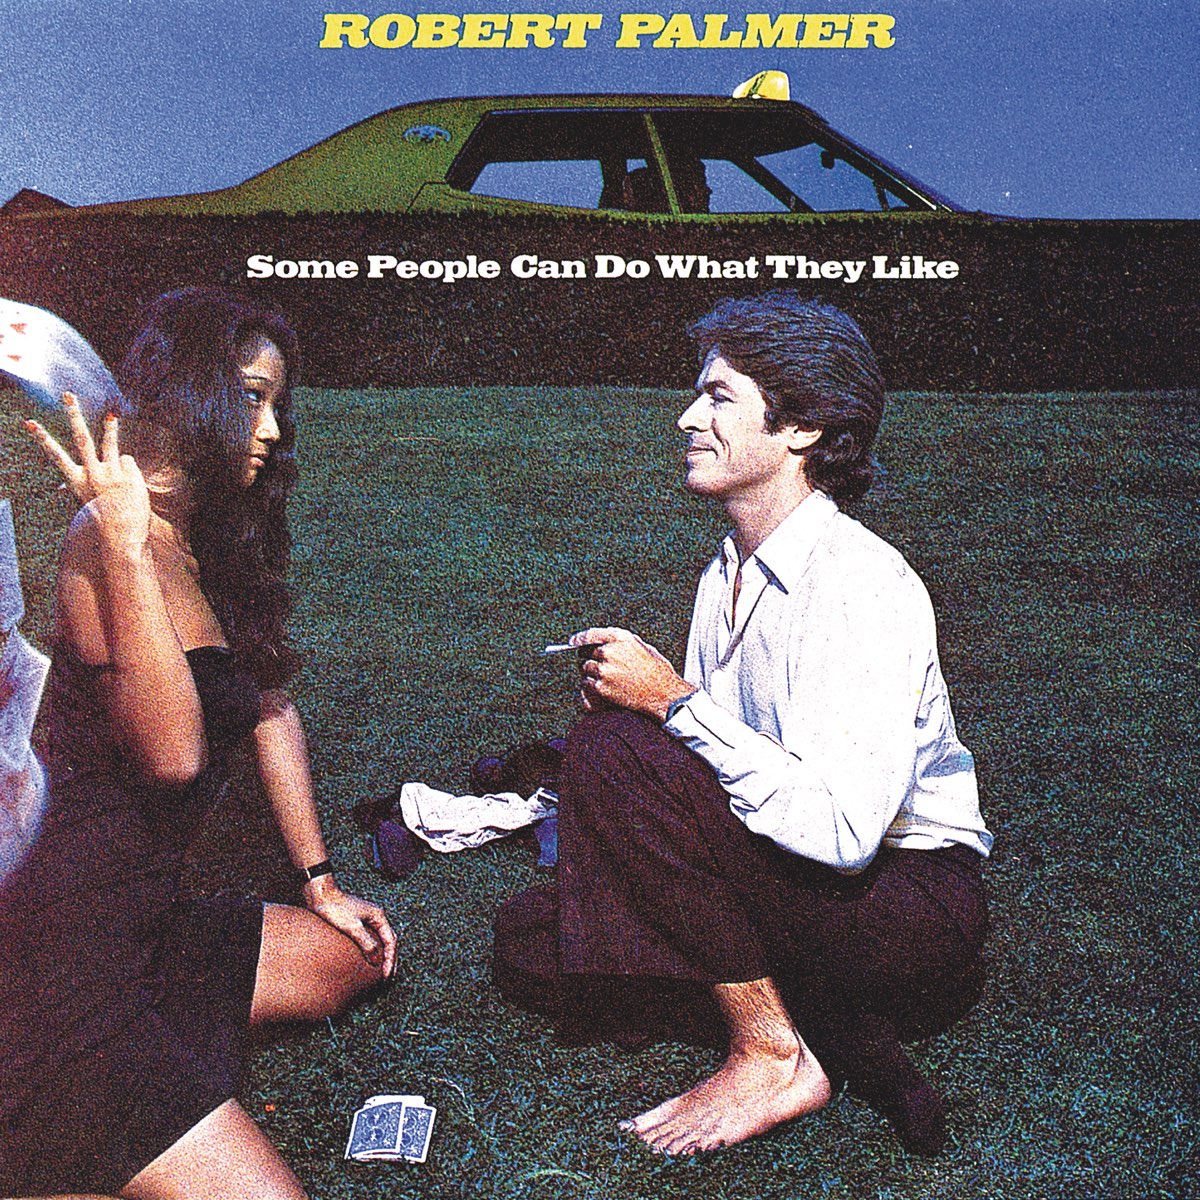 What band was Robert Palmer with?